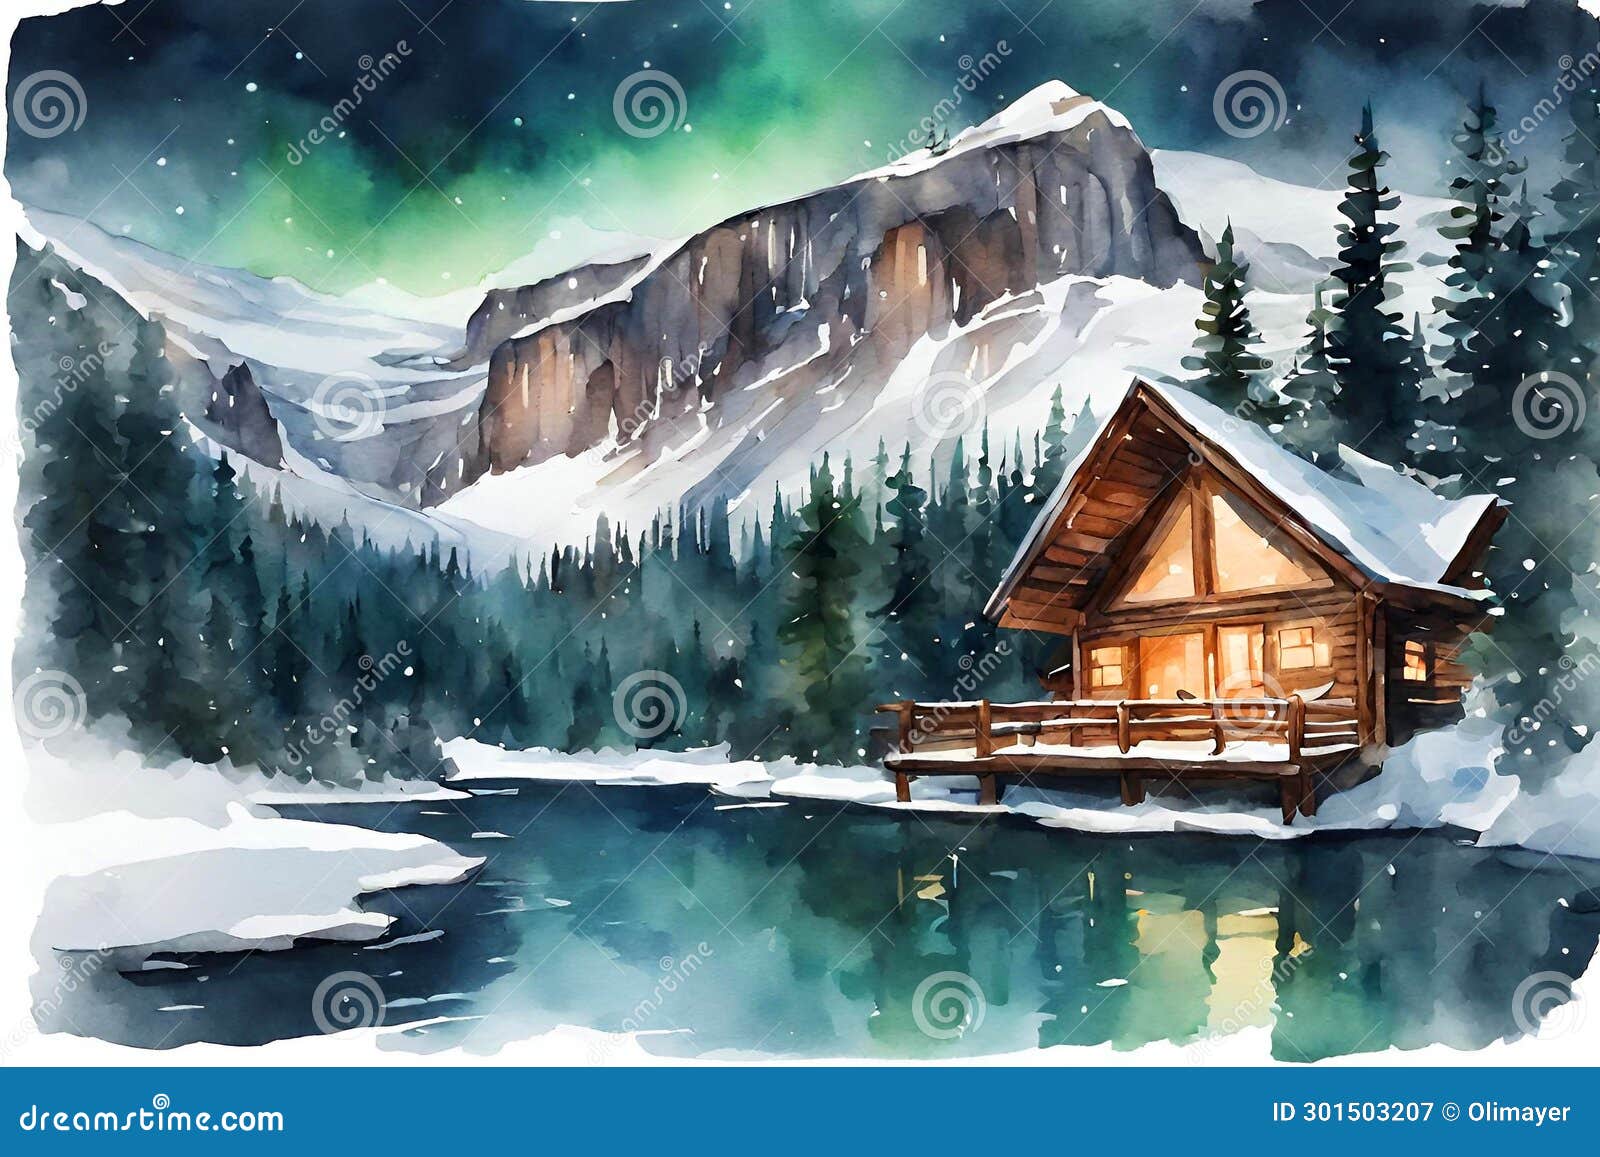 watercolor  of luxury villas in the swiss alps with lake views in winter.